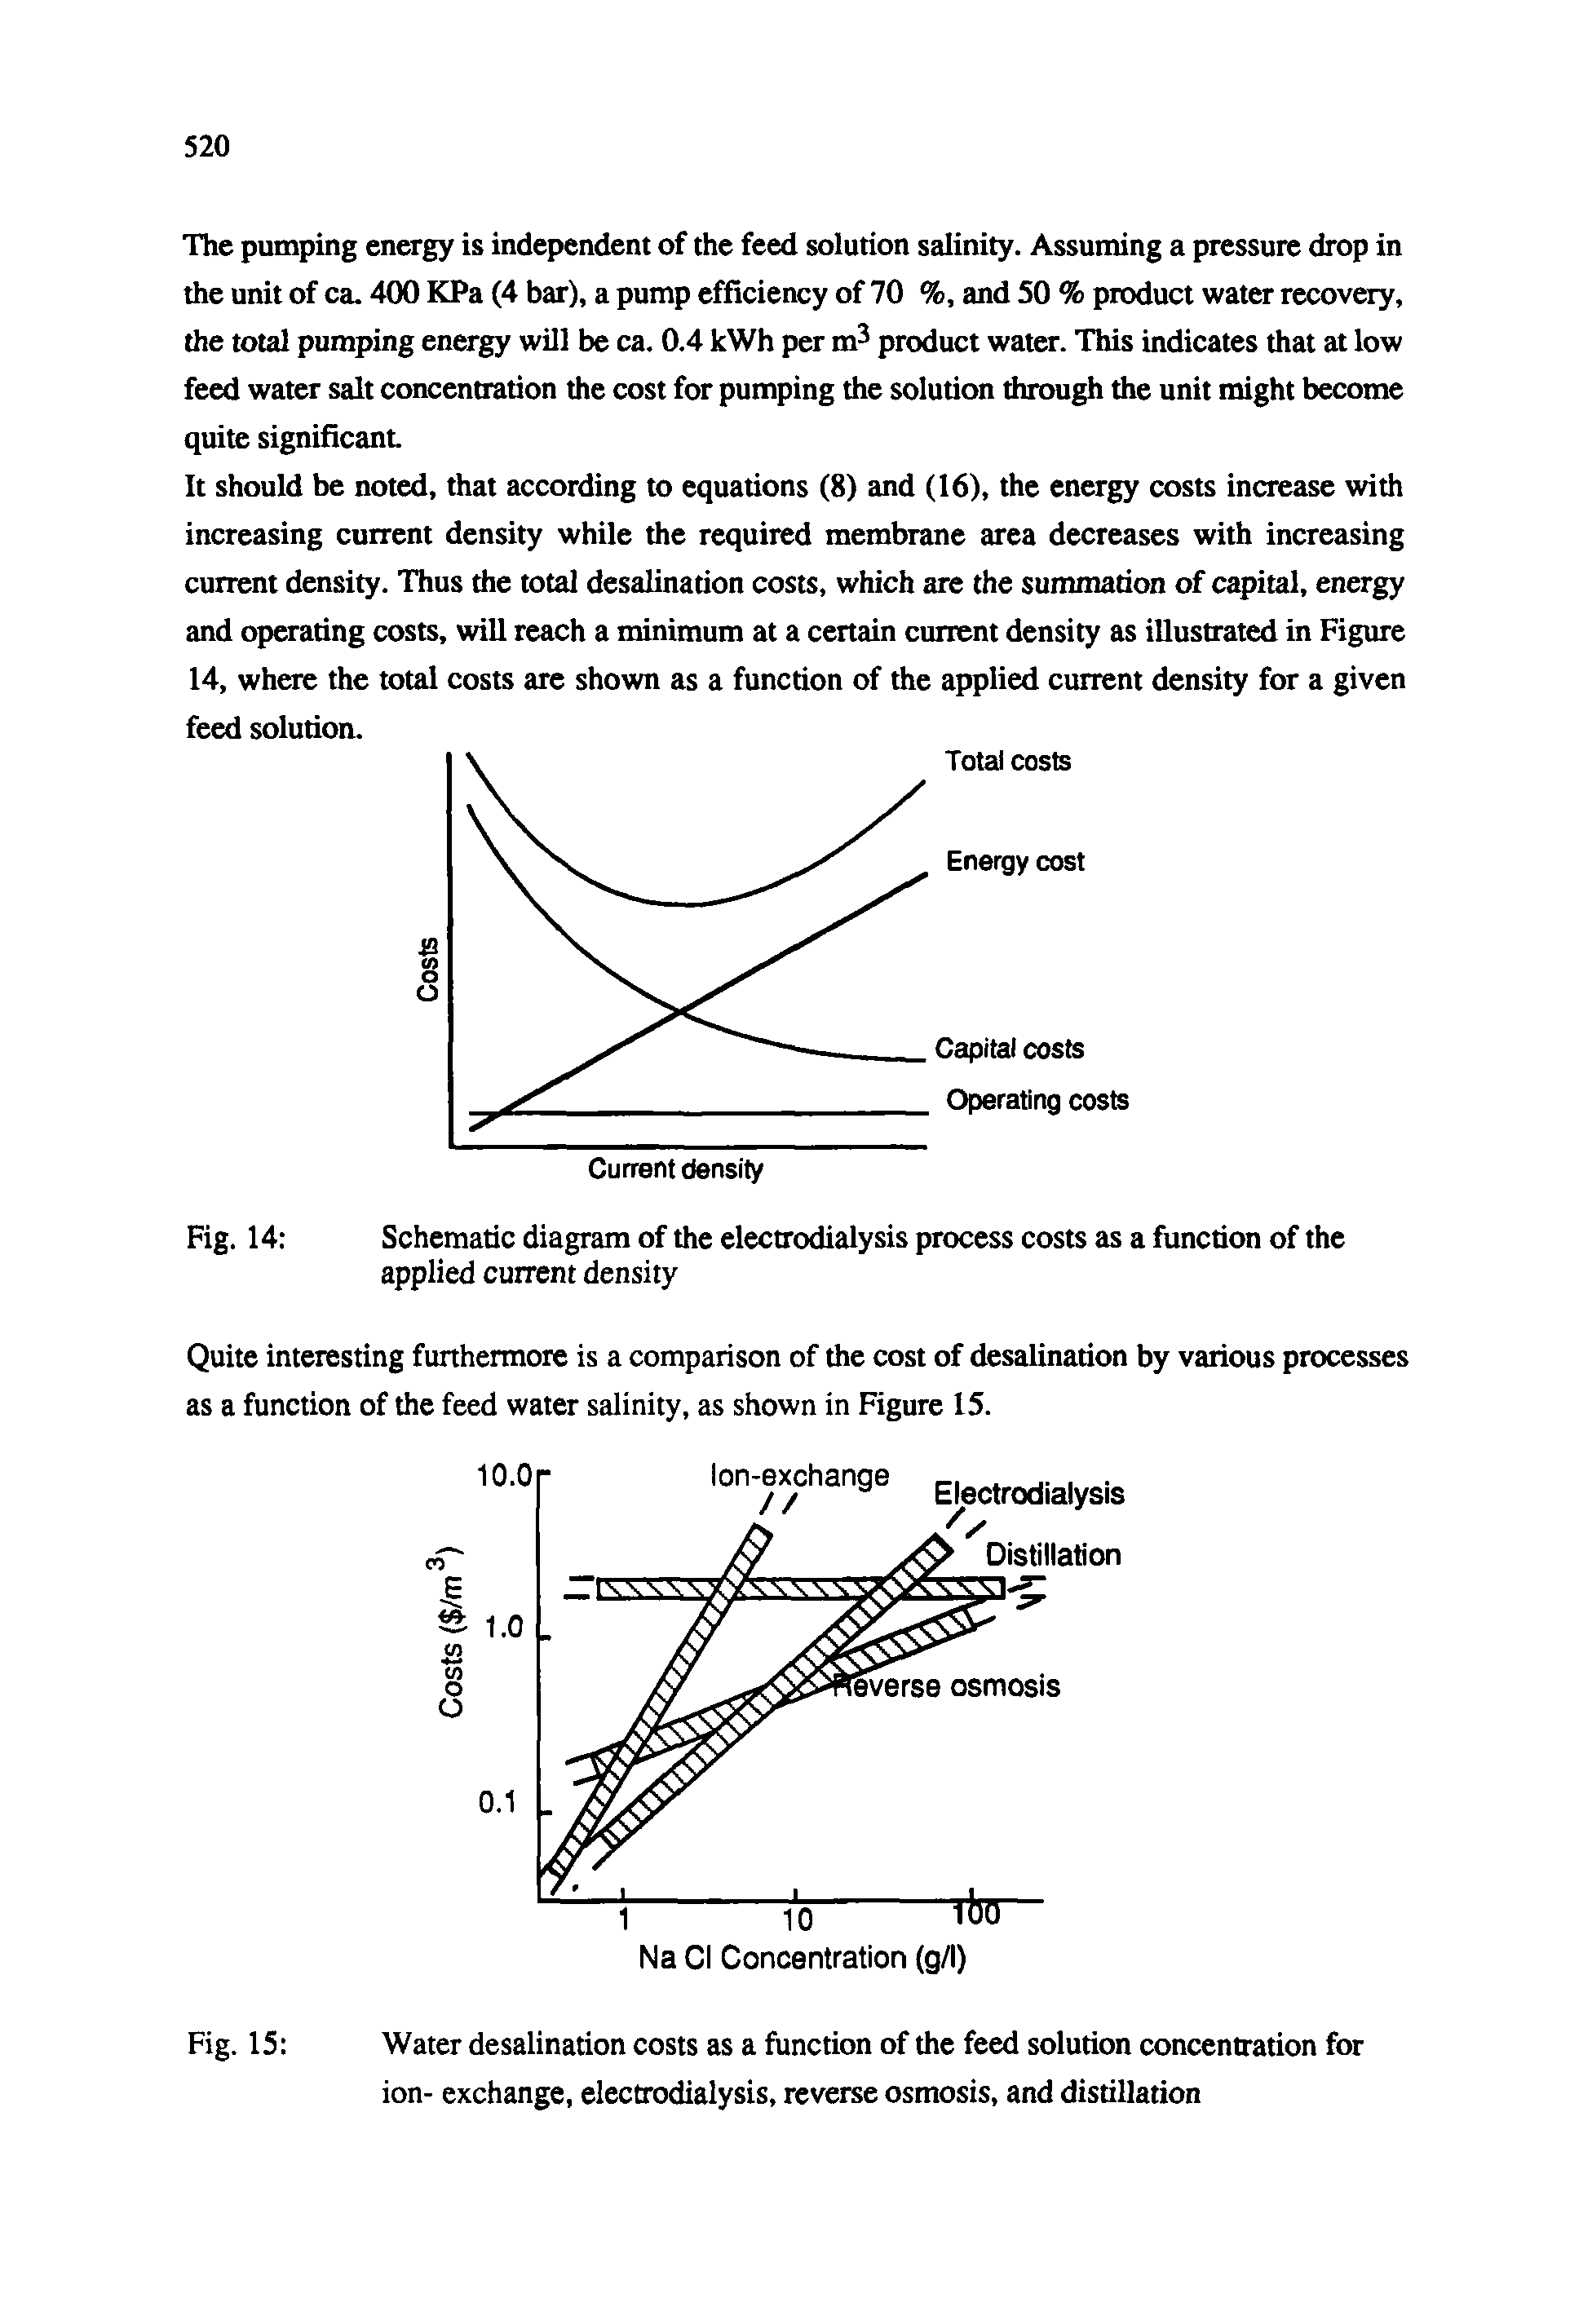 Fig. 14 Schematic diagram of the electrodialysis process costs as a function of the...